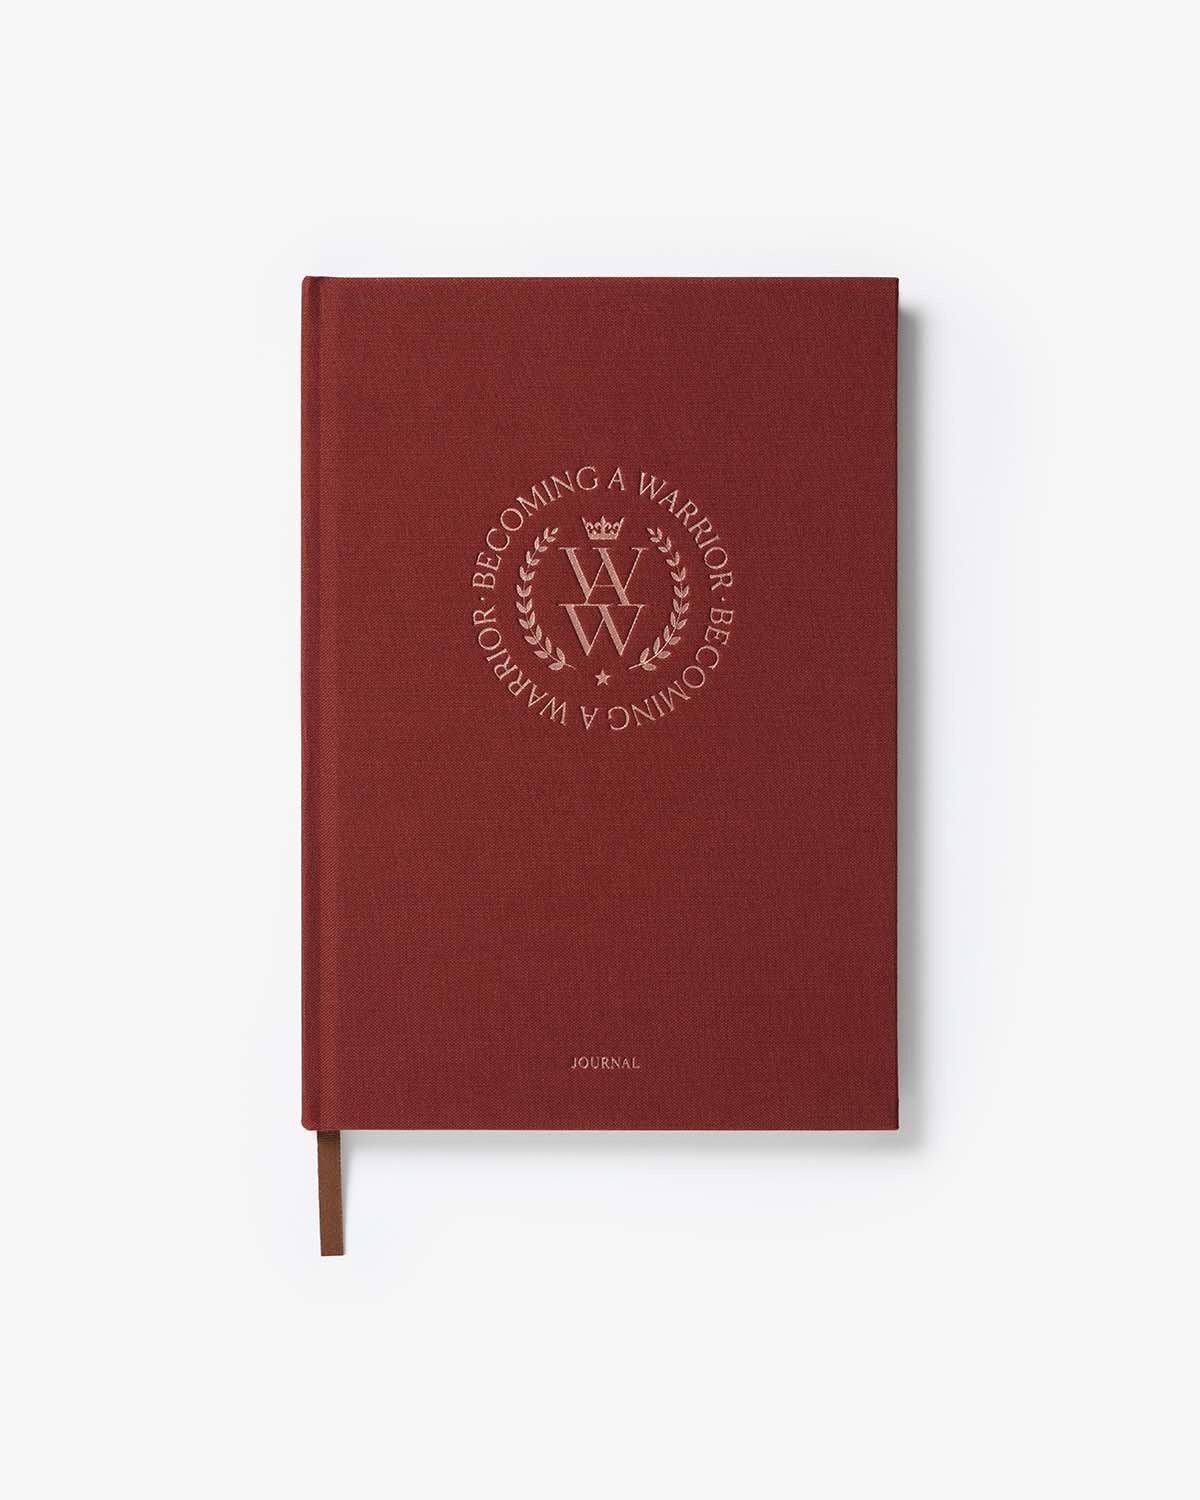 intelligent change becoming a warrior journal, from our mother's day gift guide